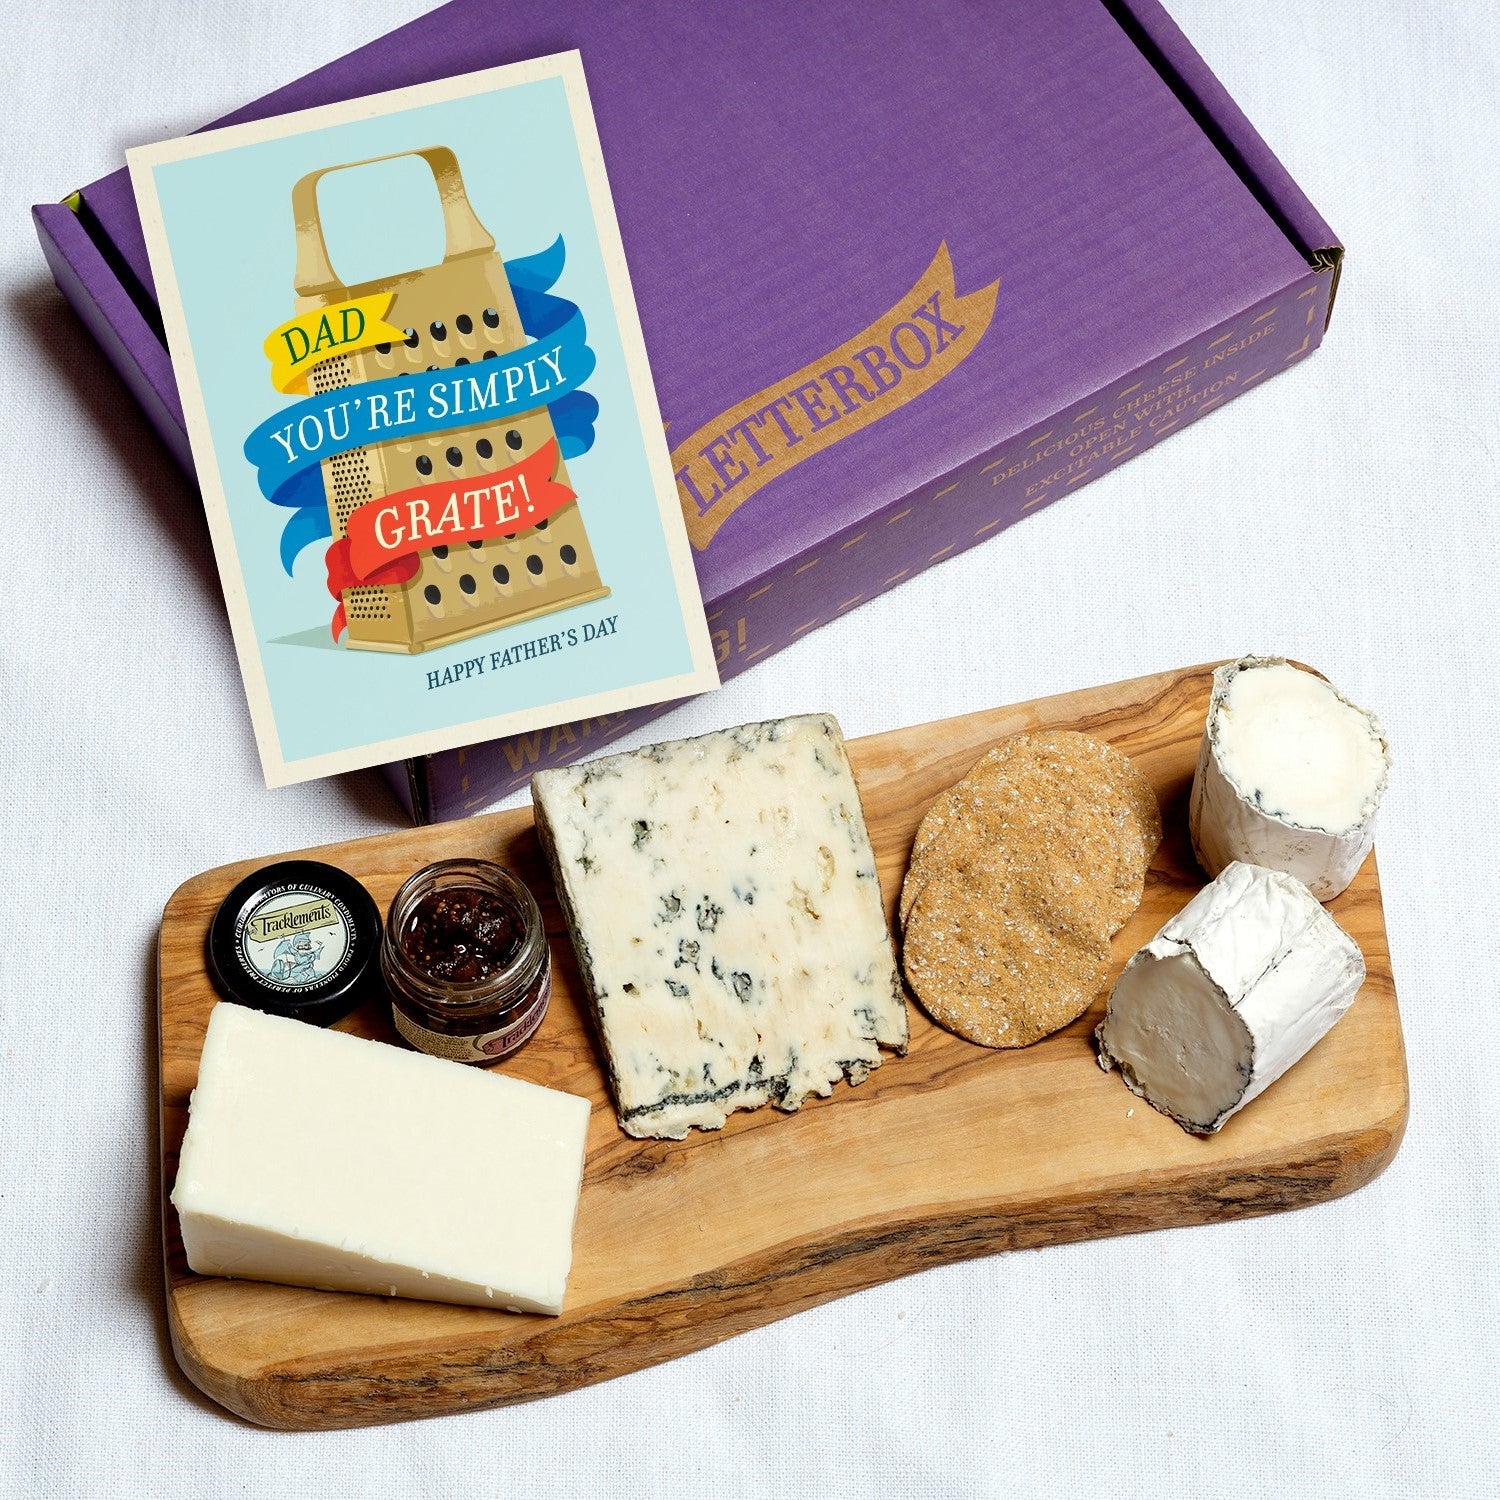 Father's Day Goats Cheese gift with Crackers & Chutney, maxi with full size goats cheeses.